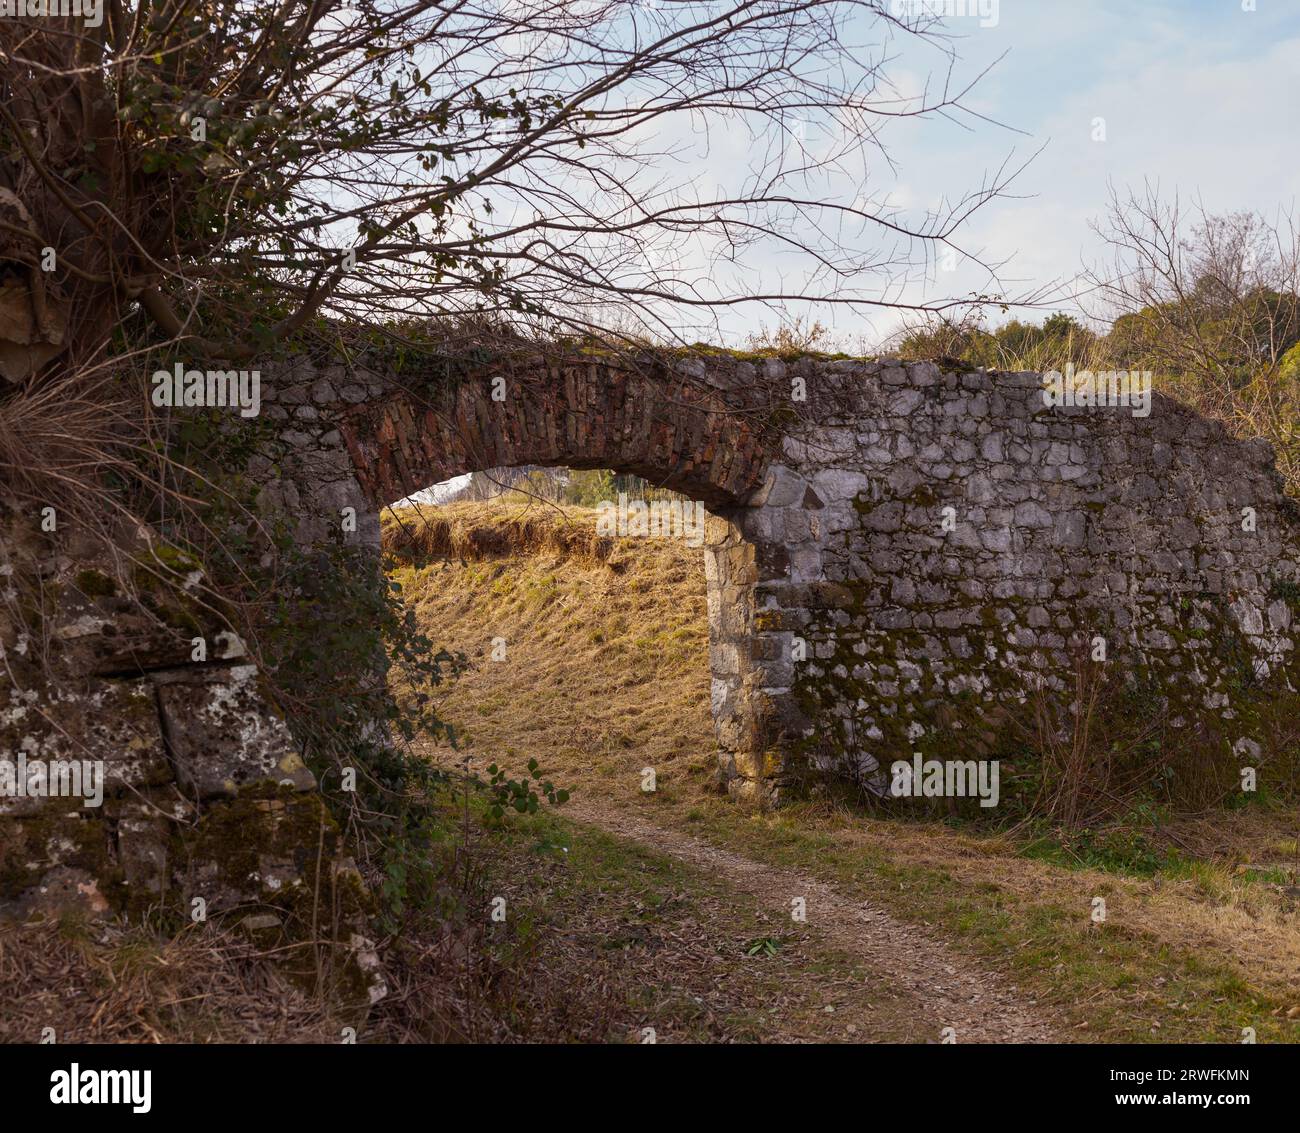 View of the Stone arch of the Ramparts of Palmanova, italy Stock Photo